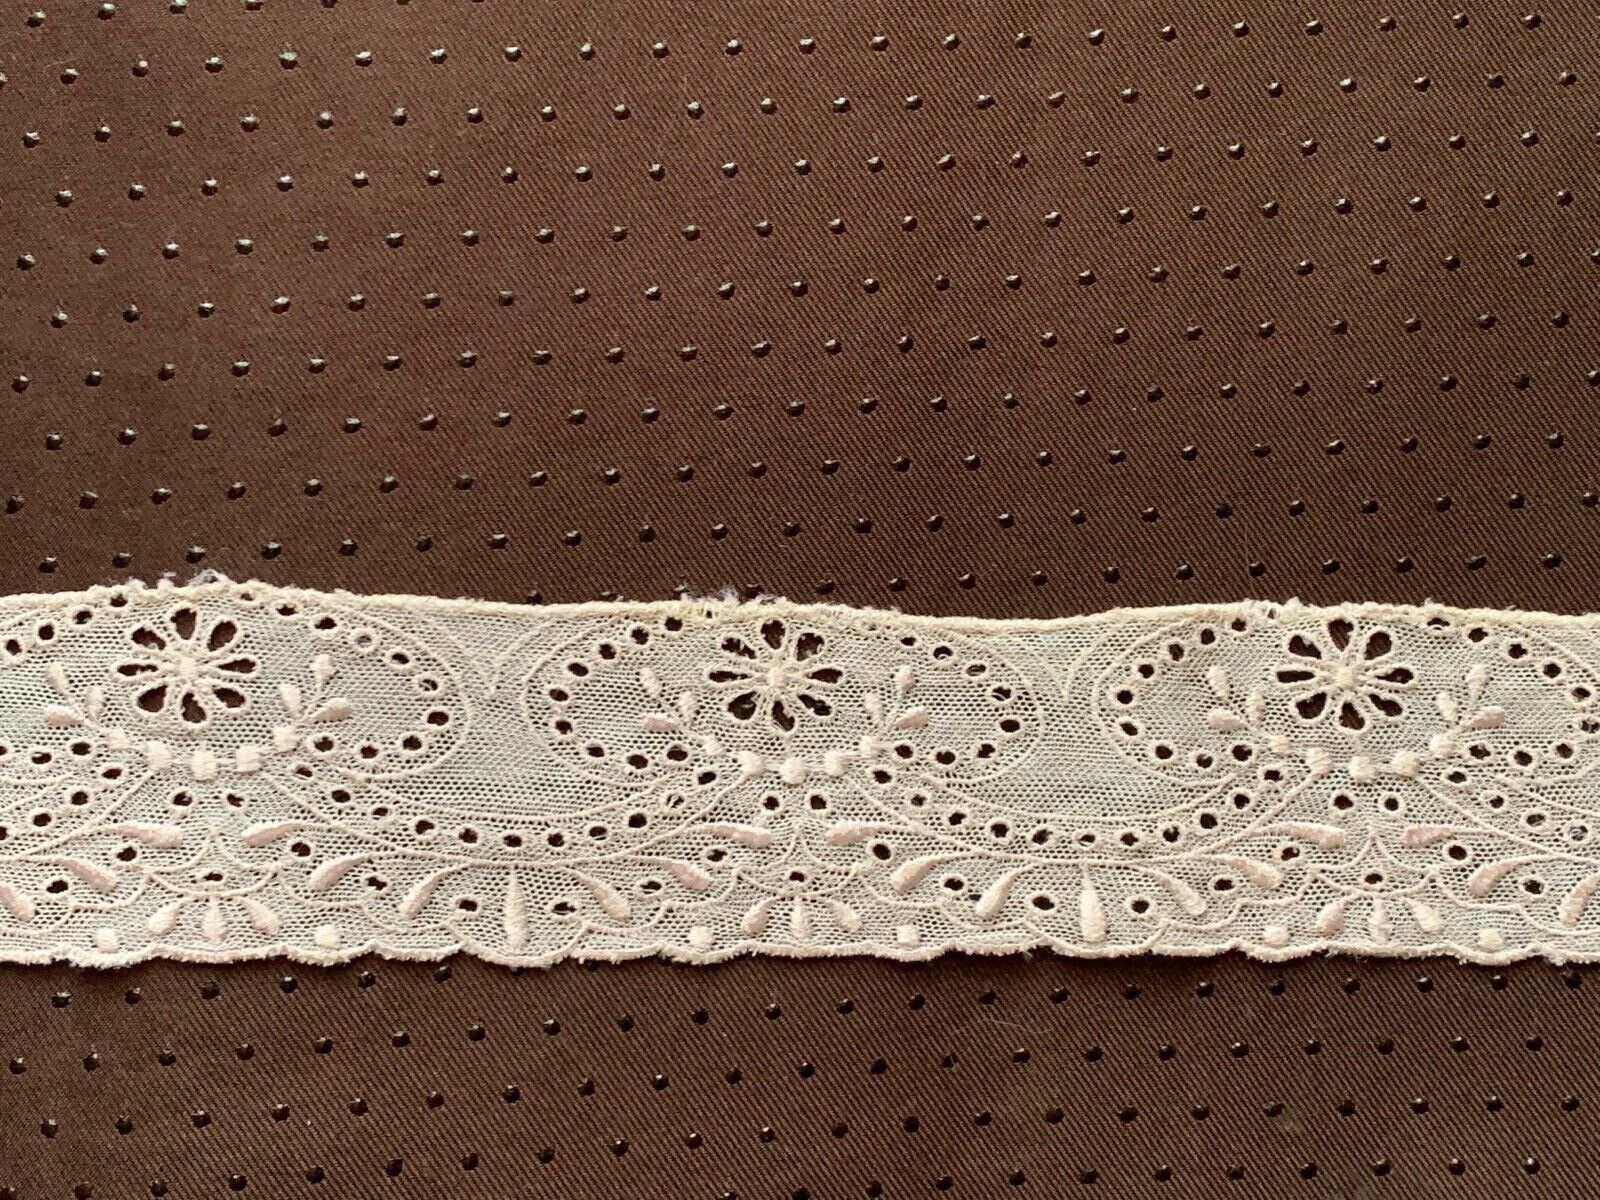 Vintage French Lace edging - Tulle embroidered - Floral design - 185cm by 4.5cm